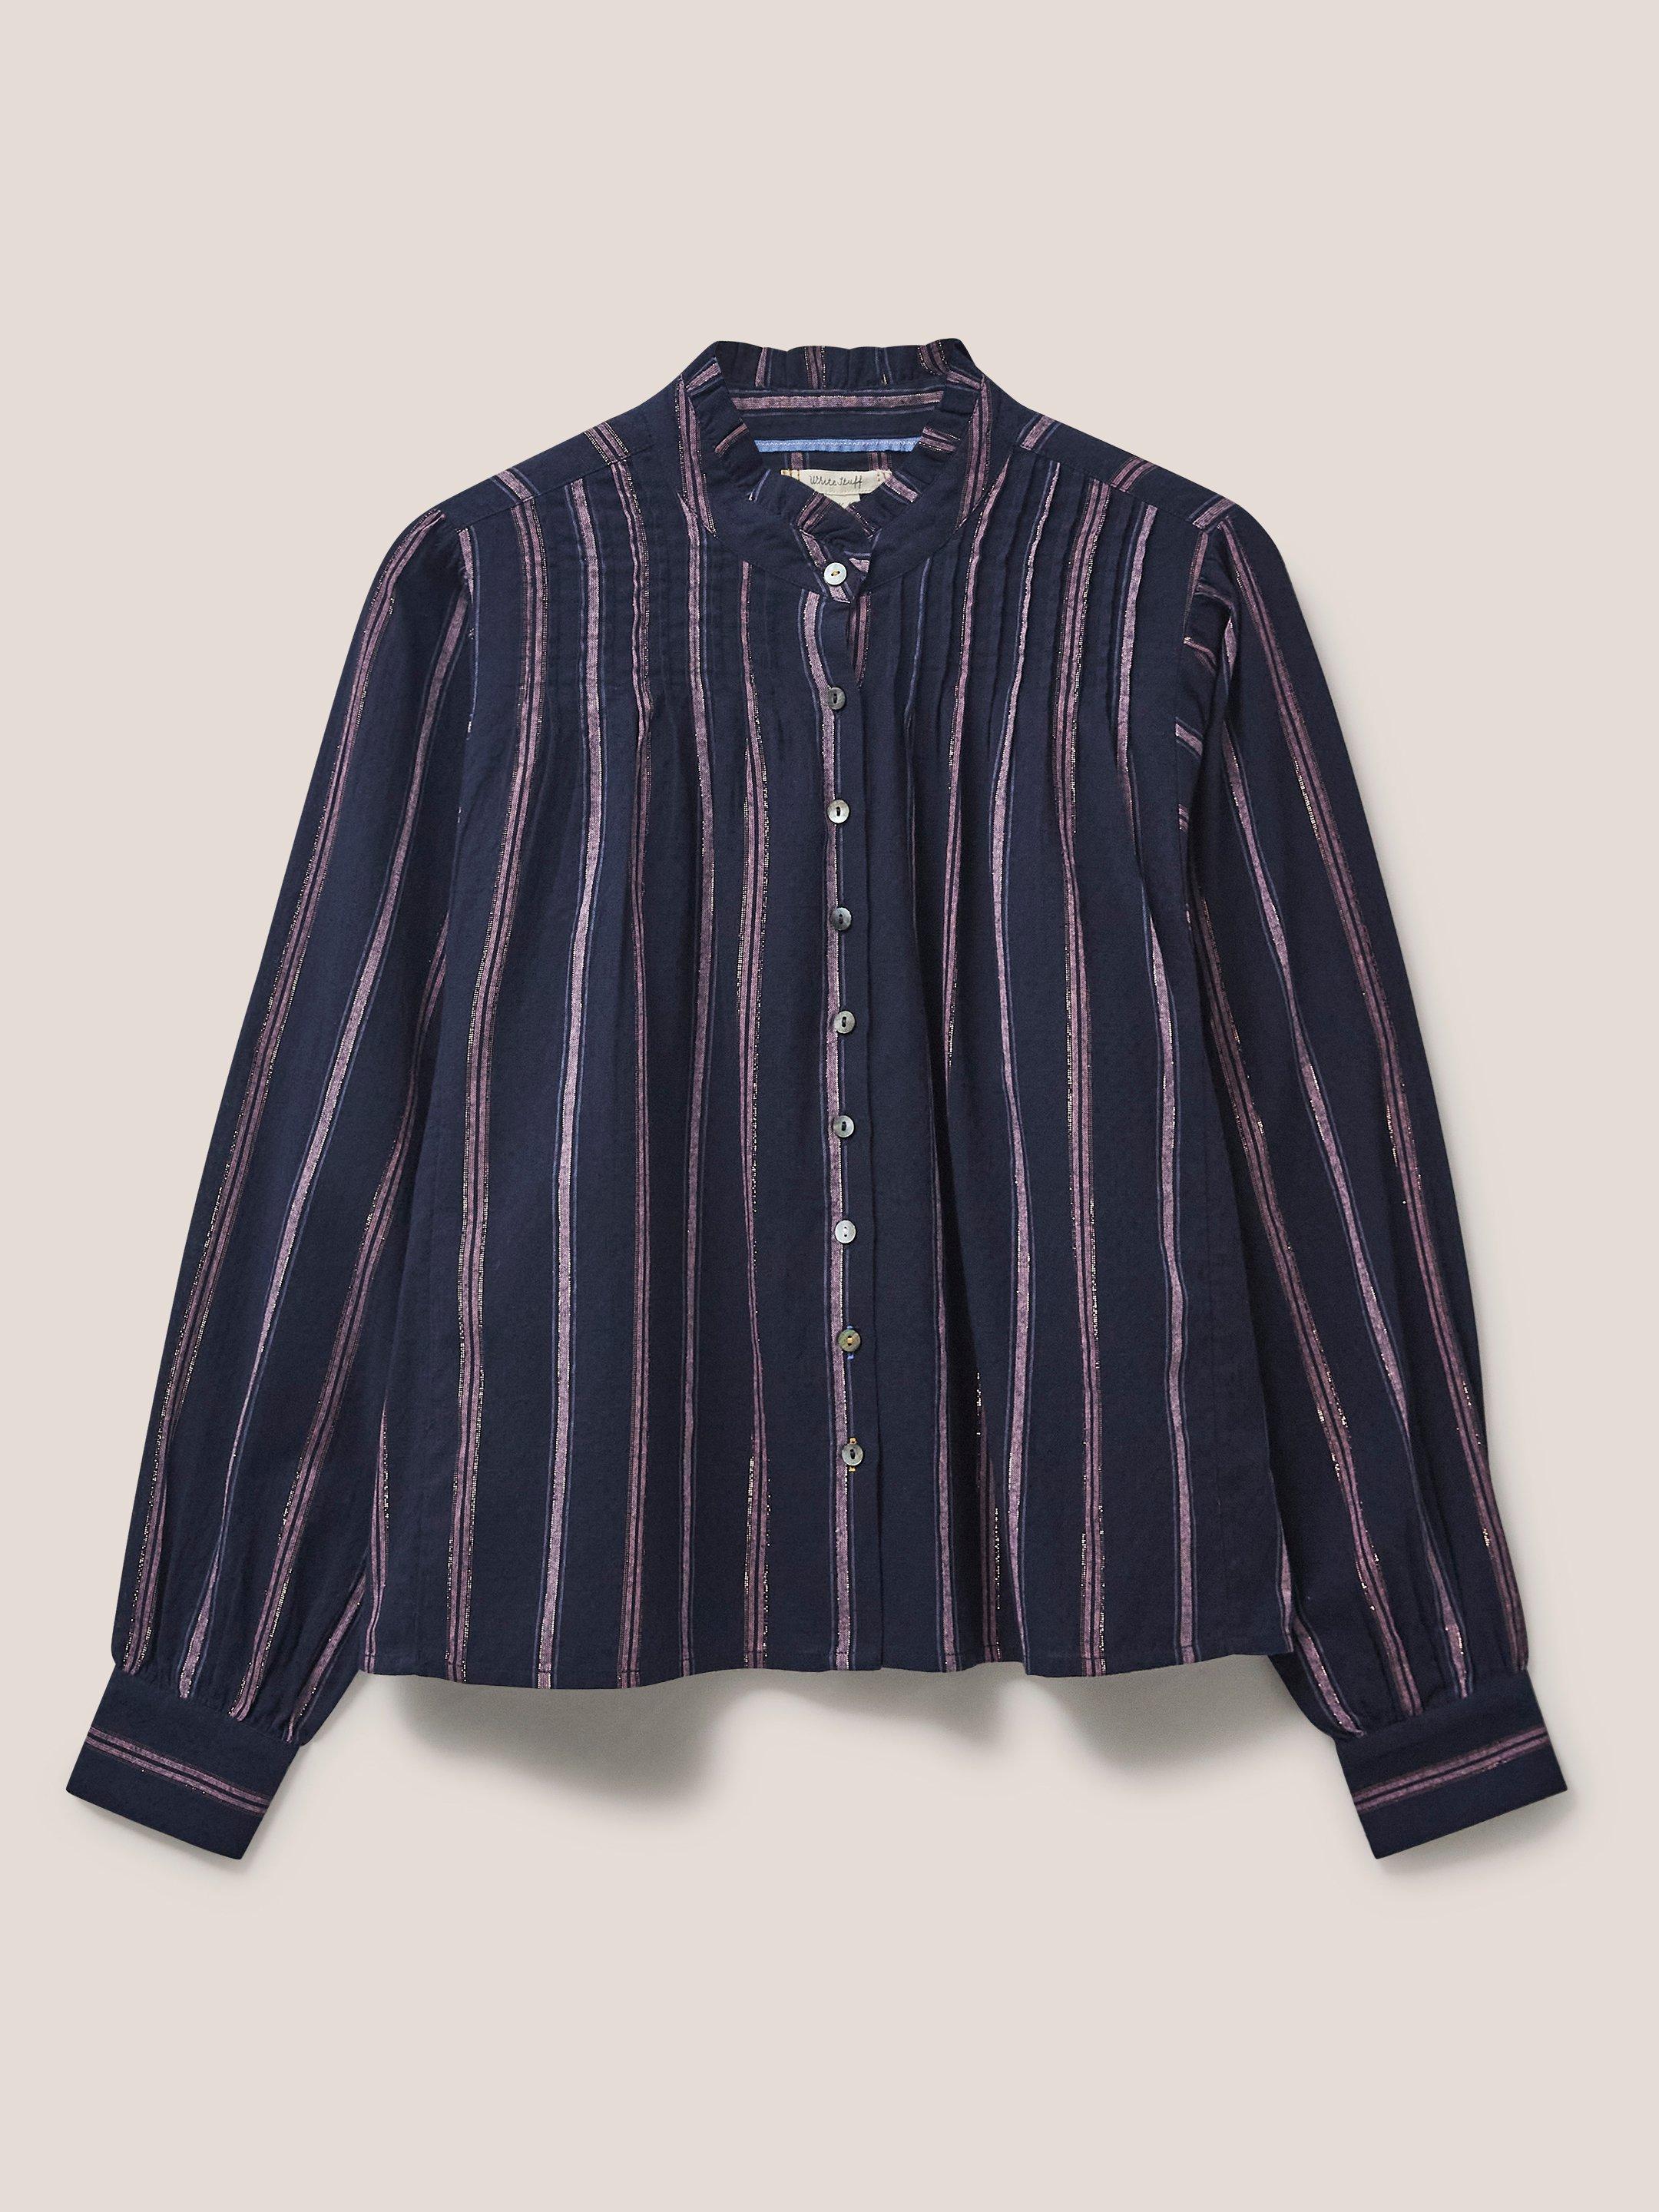 Paige Stripe Shirt in NAVY MULTI - FLAT FRONT